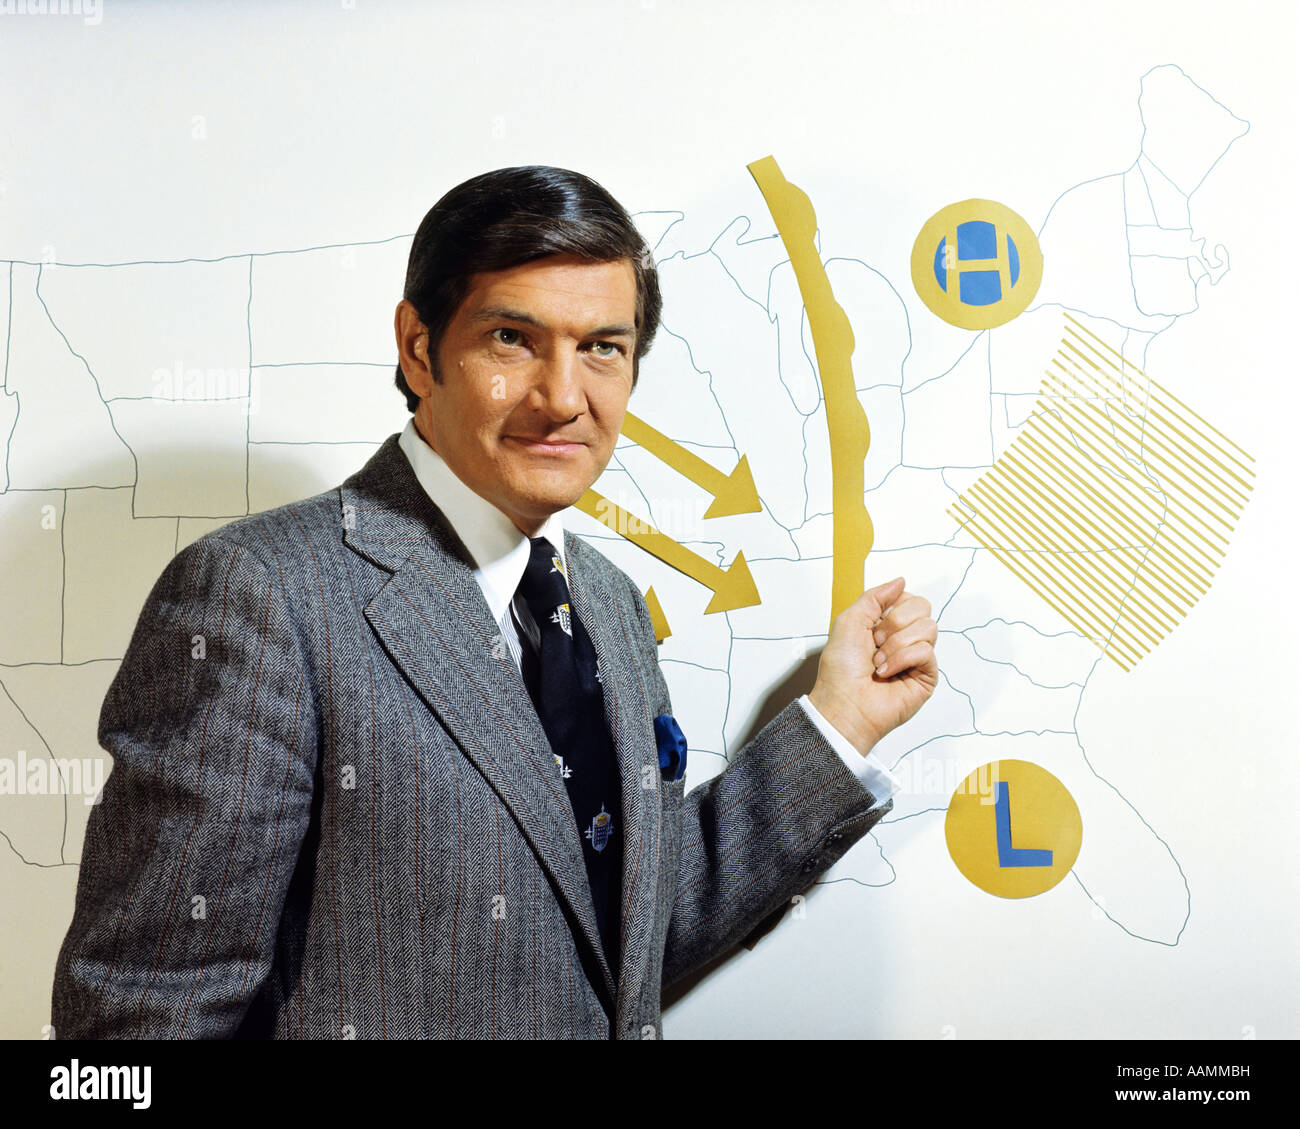 1970s TV TELEVISION WEATHERMAN STAND IN FRONT OF WEATHER MAP TALKING TO CAMERA METEOROLOGY HIGH LOW FRONT ISOBAR Stock Photo